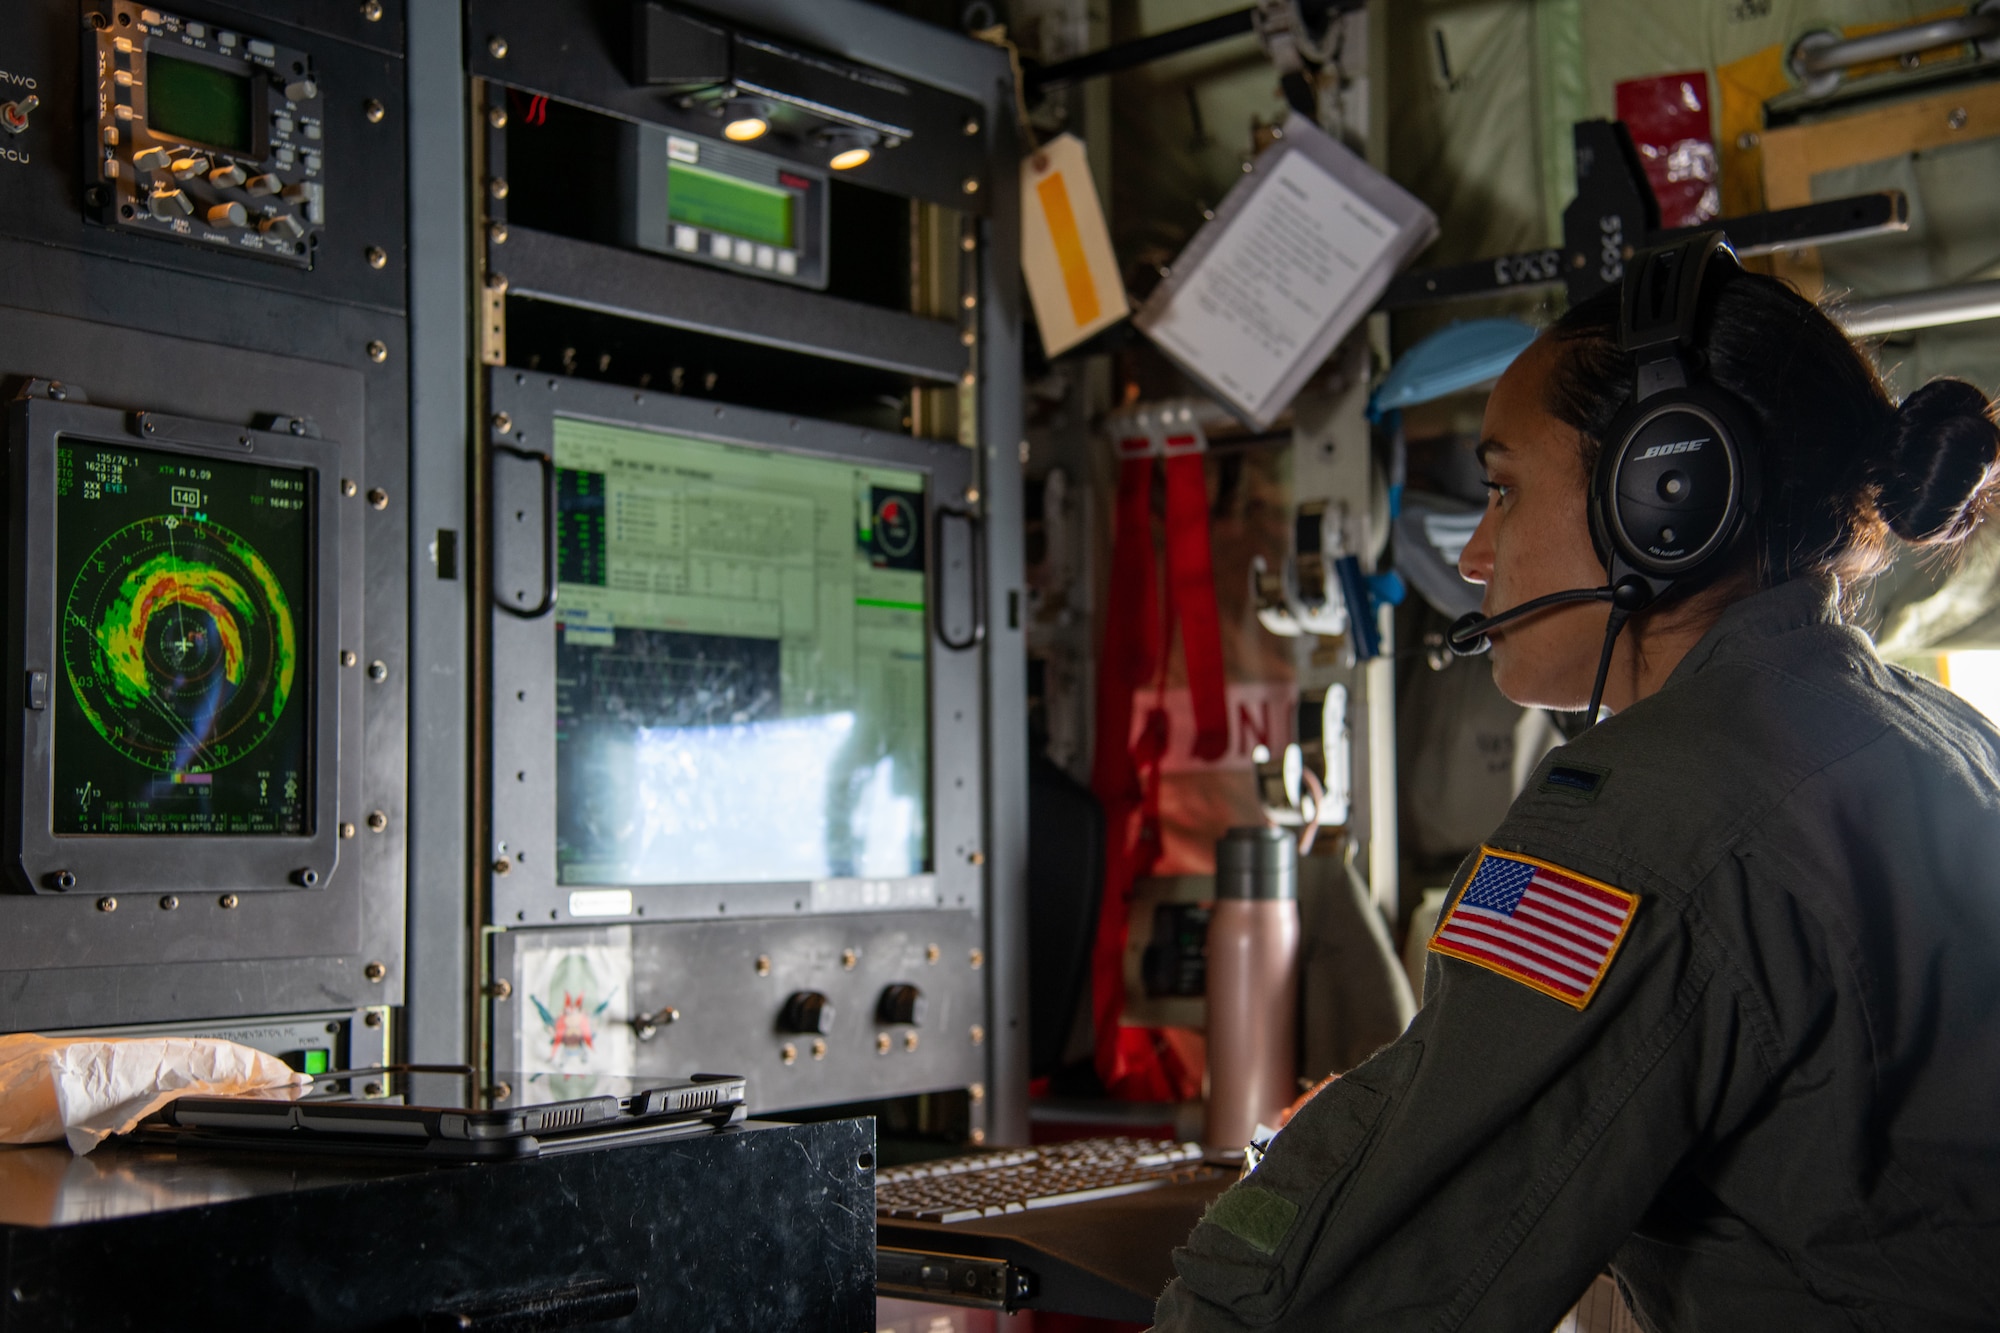 1st Lt. Amaryllis Cotto, 53rd Weather Reconnaissance Squadron aerial reconnaissance weather officer, monitors data collected in Hurricane Ida Aug. 29, 2021. Hurricane Ida made landfall as a category 4 hurricane in Louisiana. (U.S. Air Force photo by Staff Sgt. Kristen Pittman)